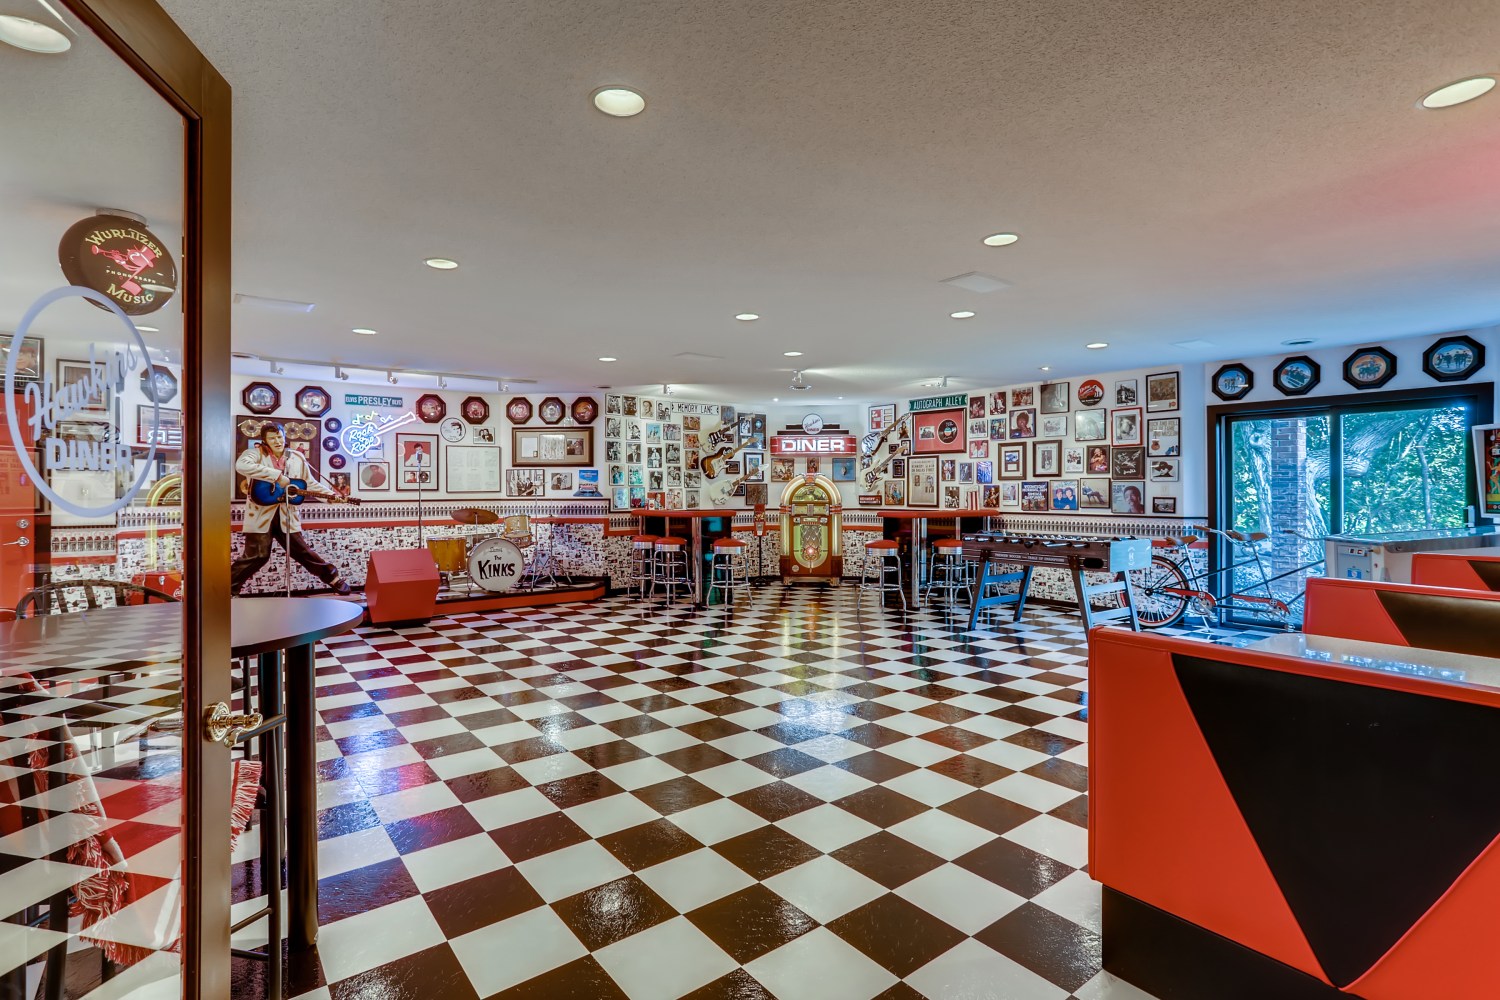 Diner with checkerboard floor